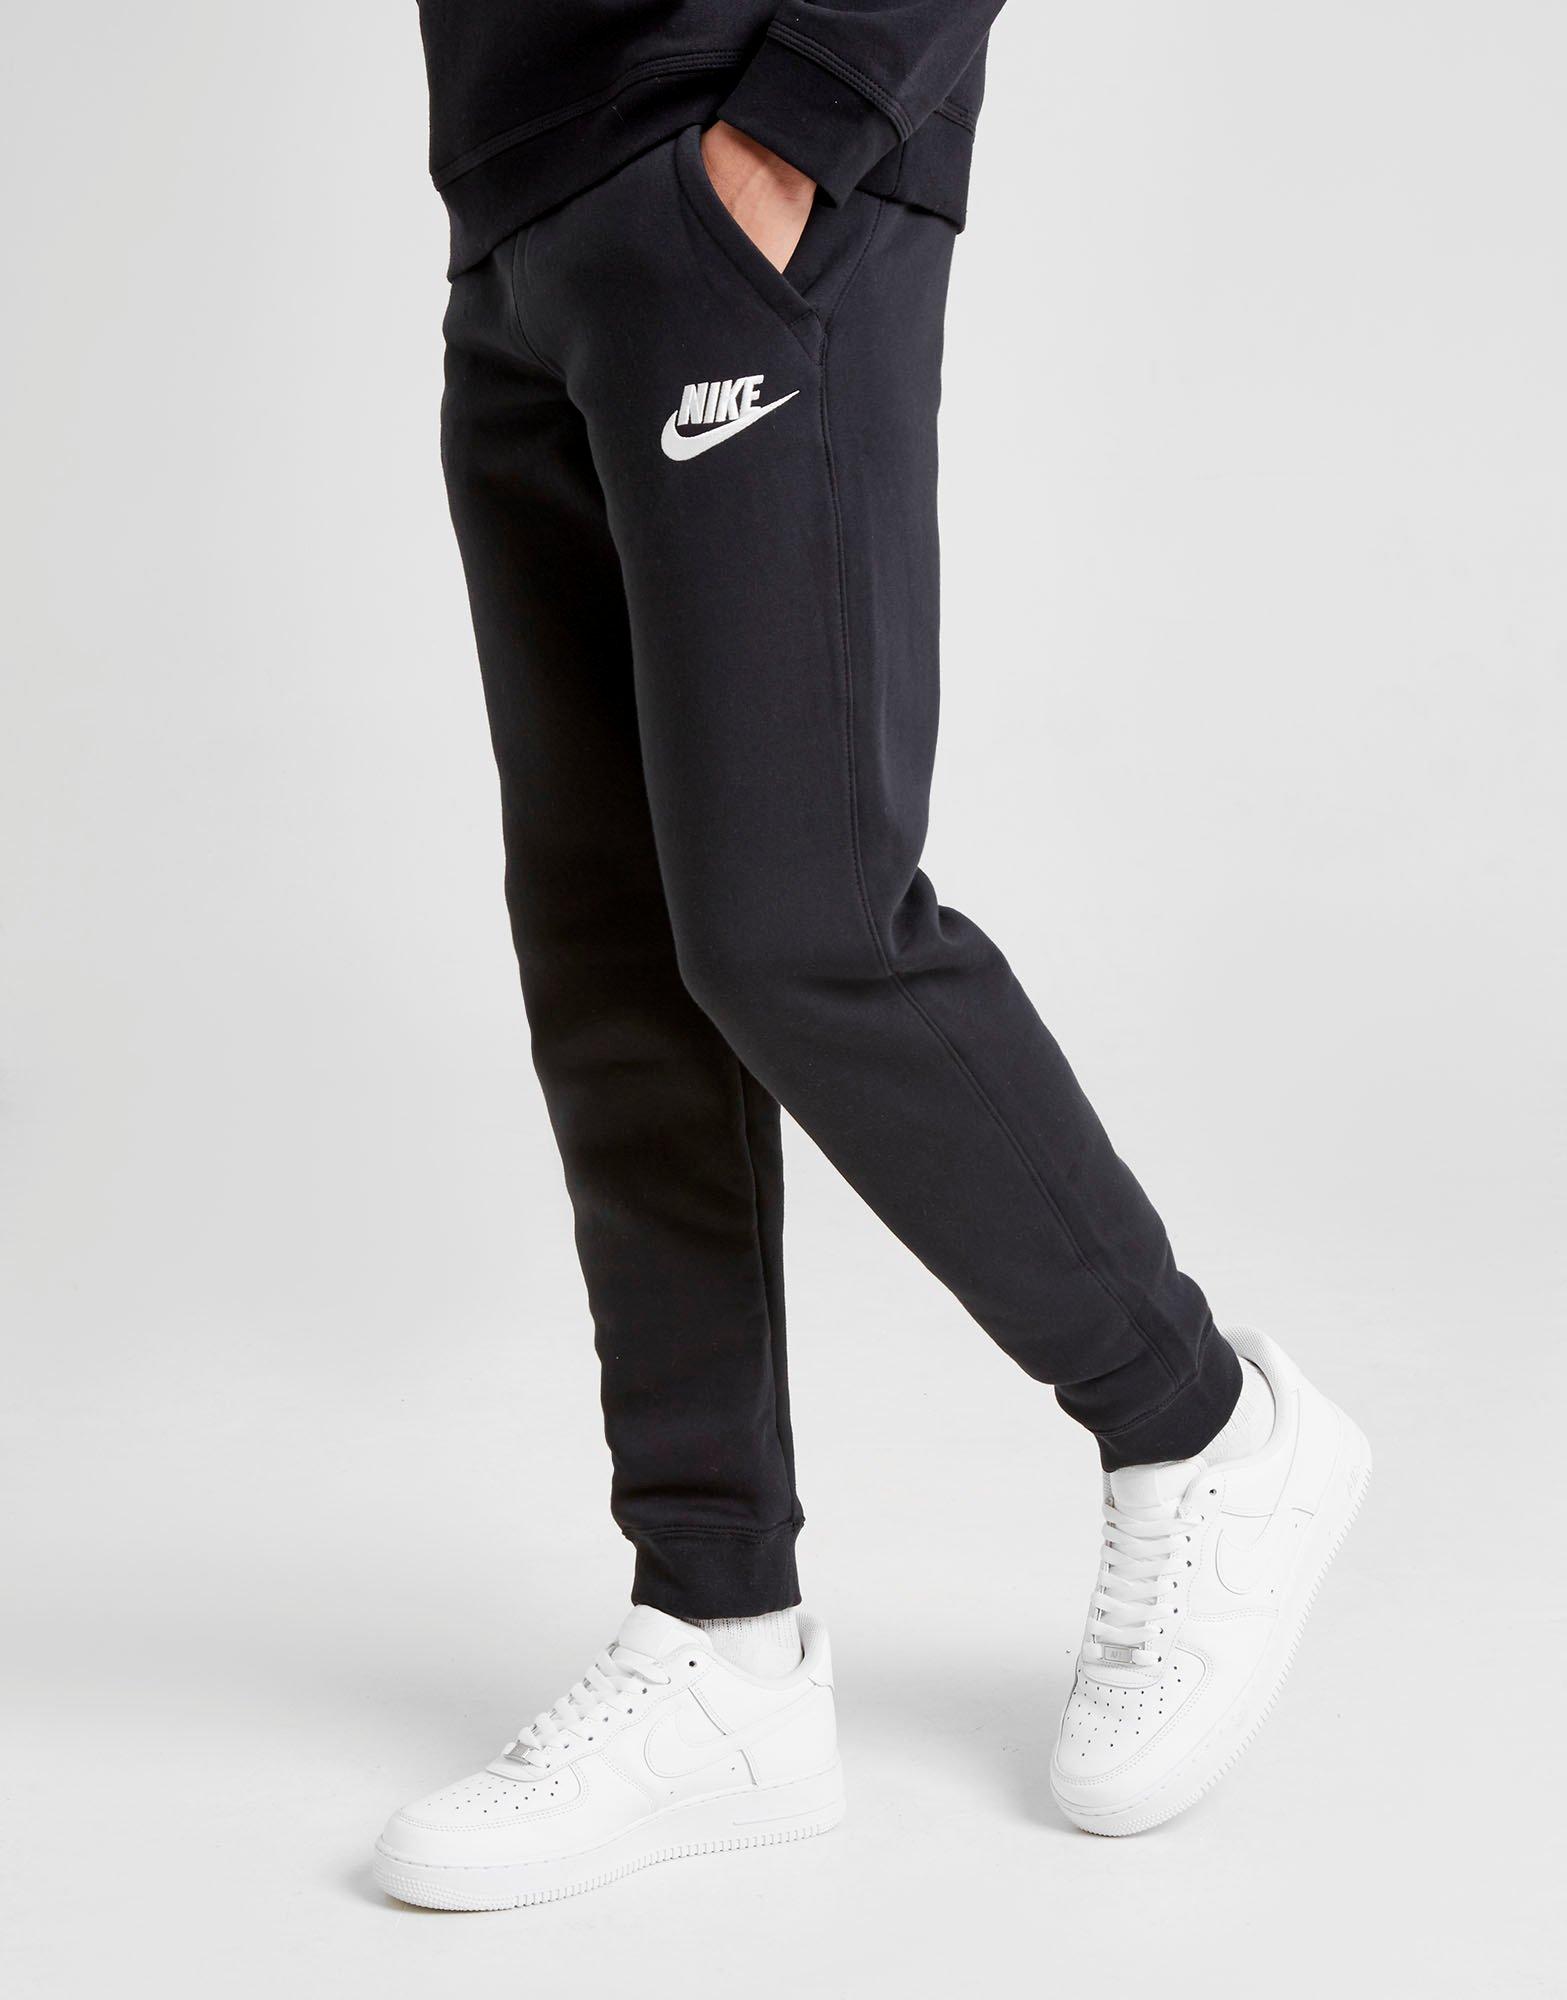 Nike Football Nike Soccer Academy Tapered Sweatpants in Black for Men